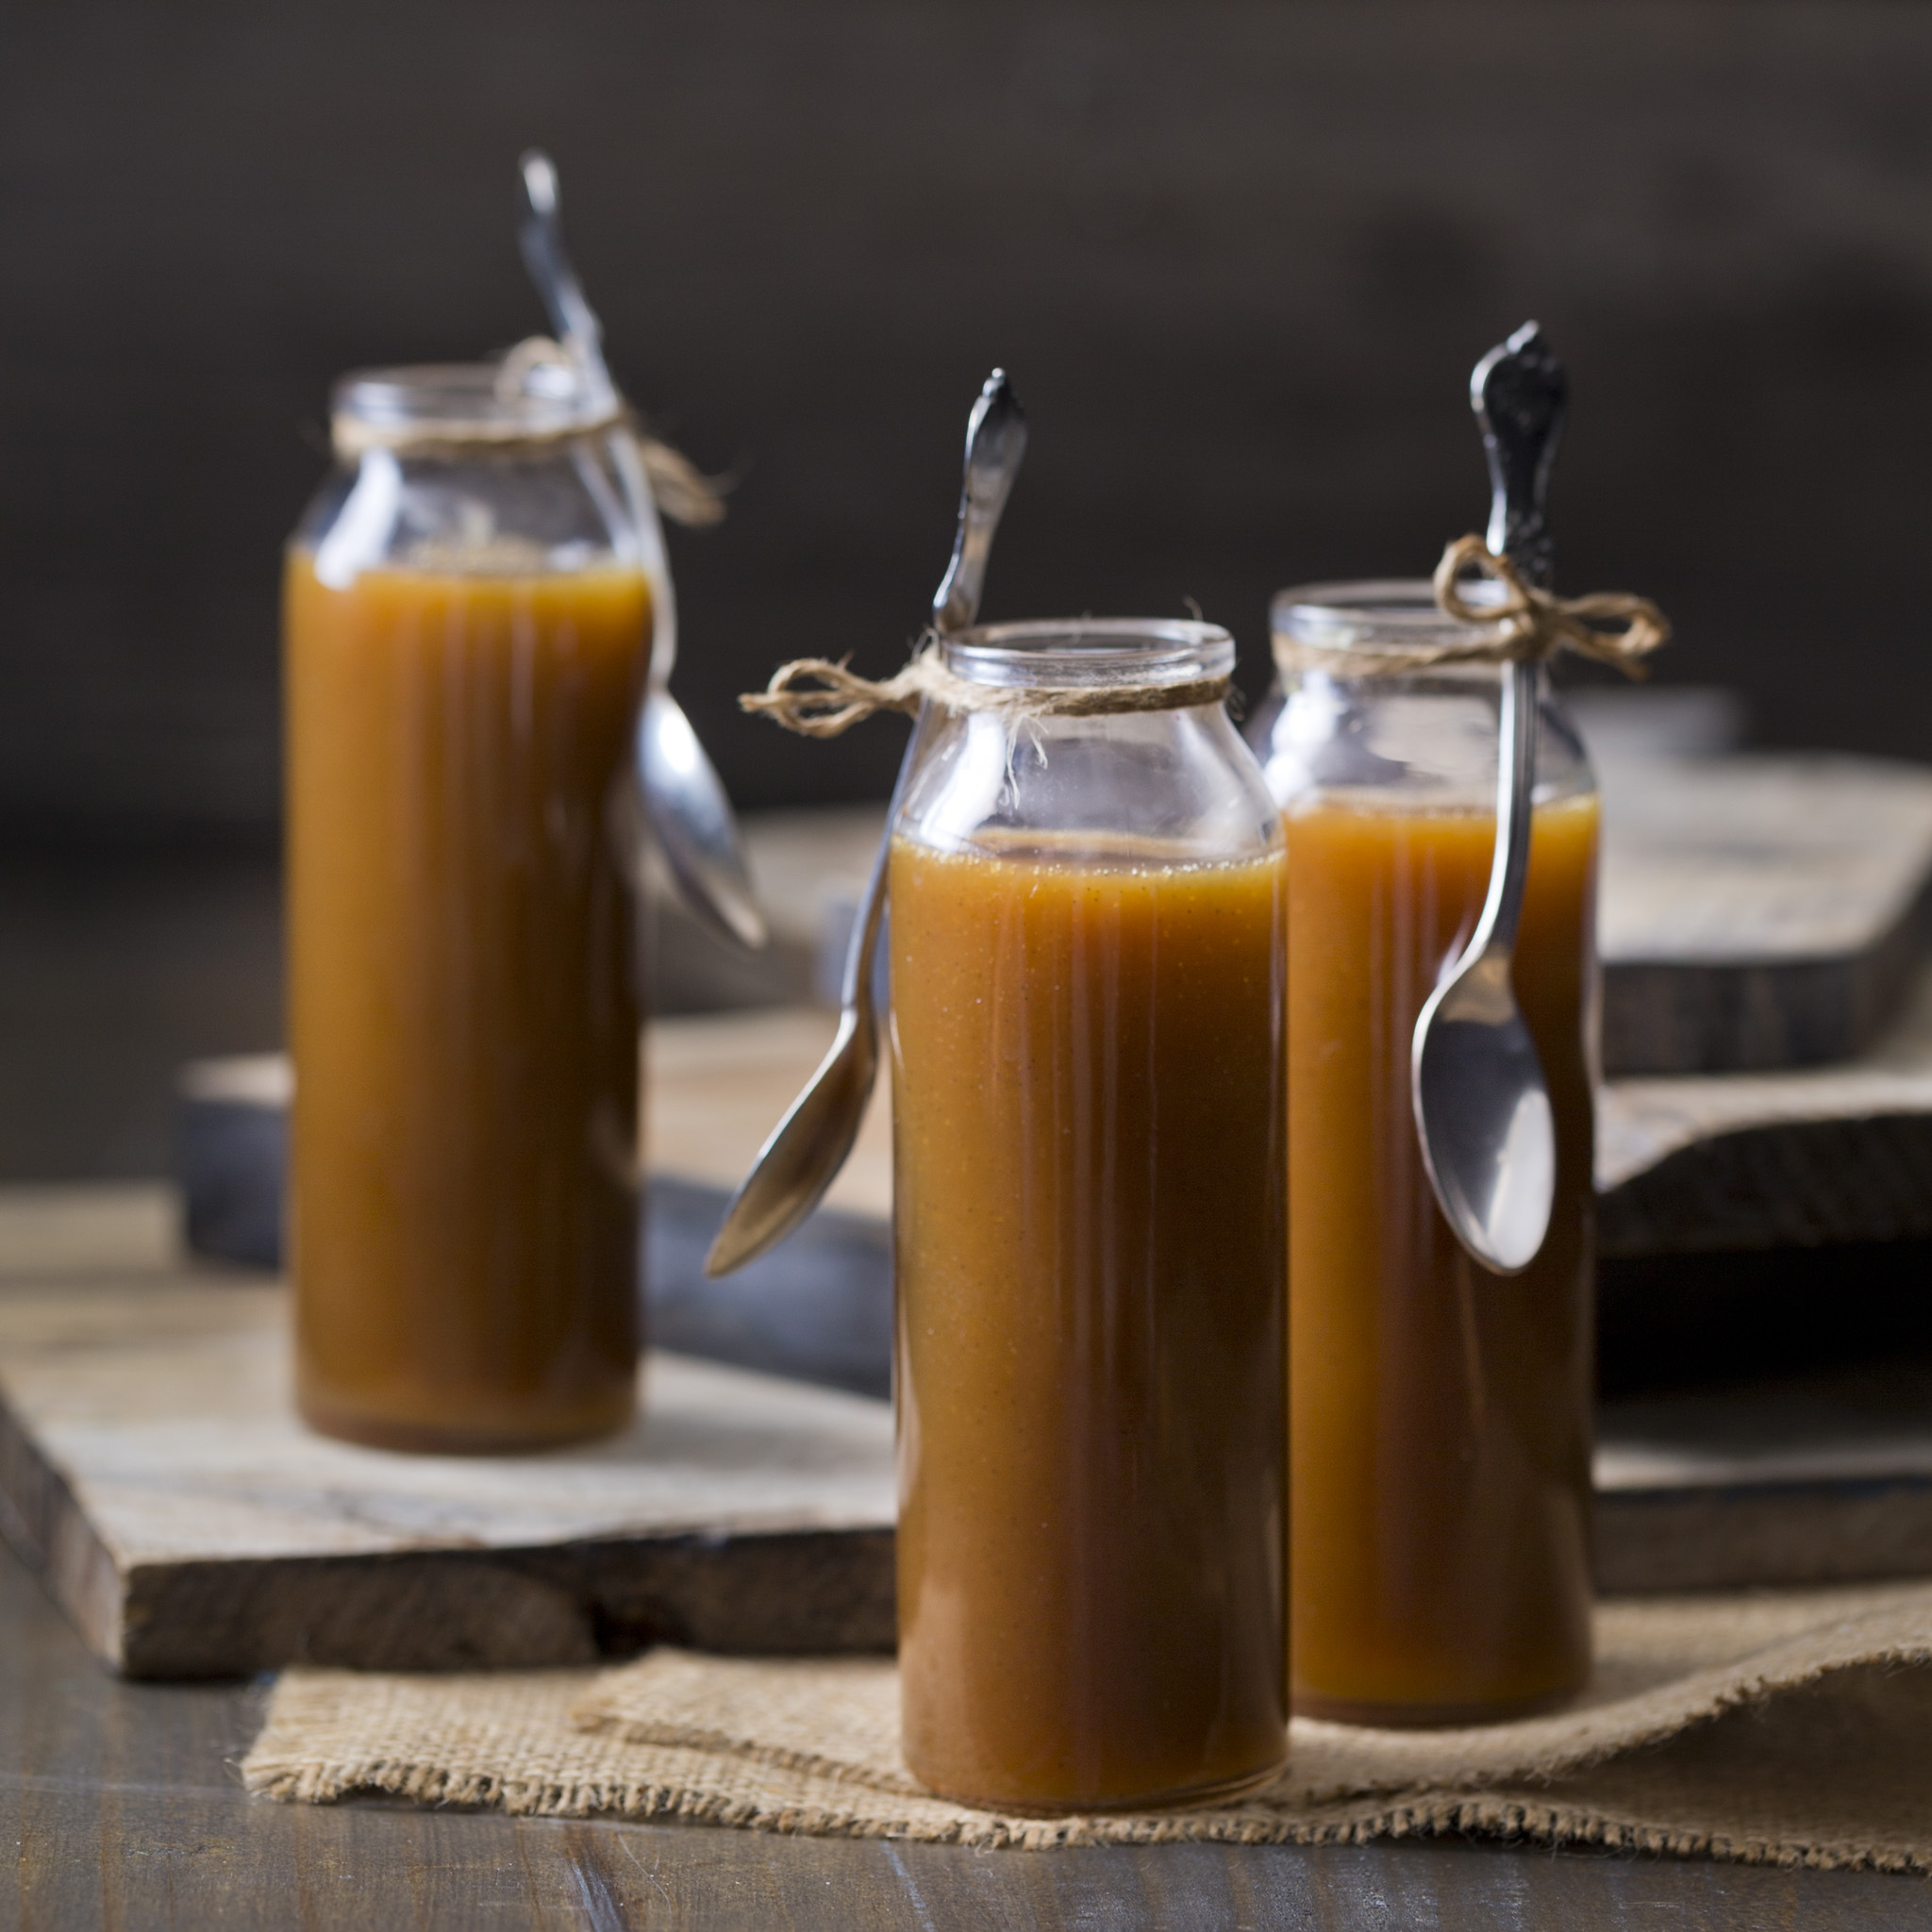 50 uses for salted caramel sauce